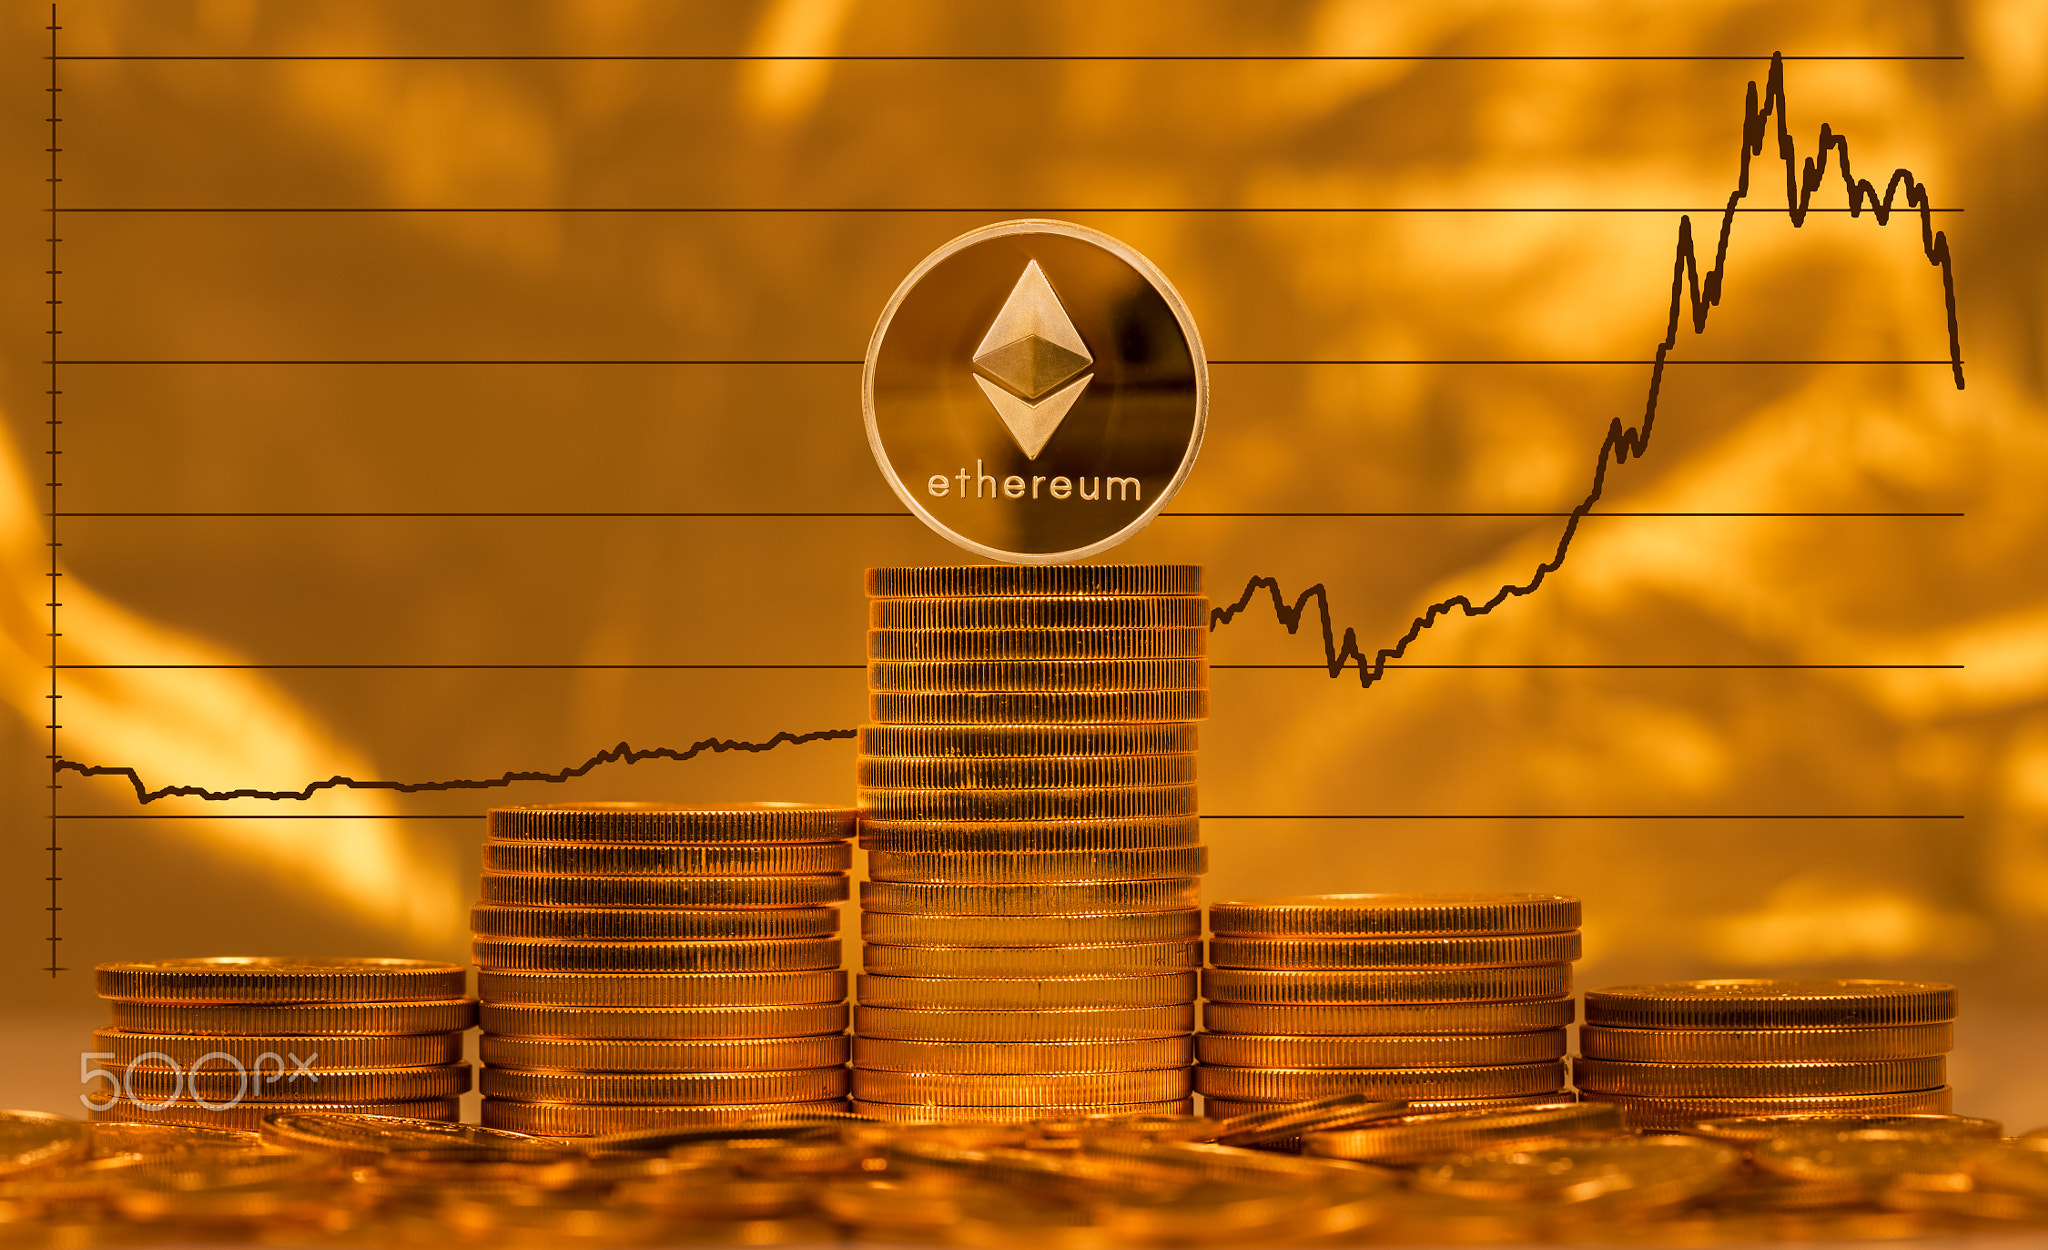 Ethereum coin against background of price graph